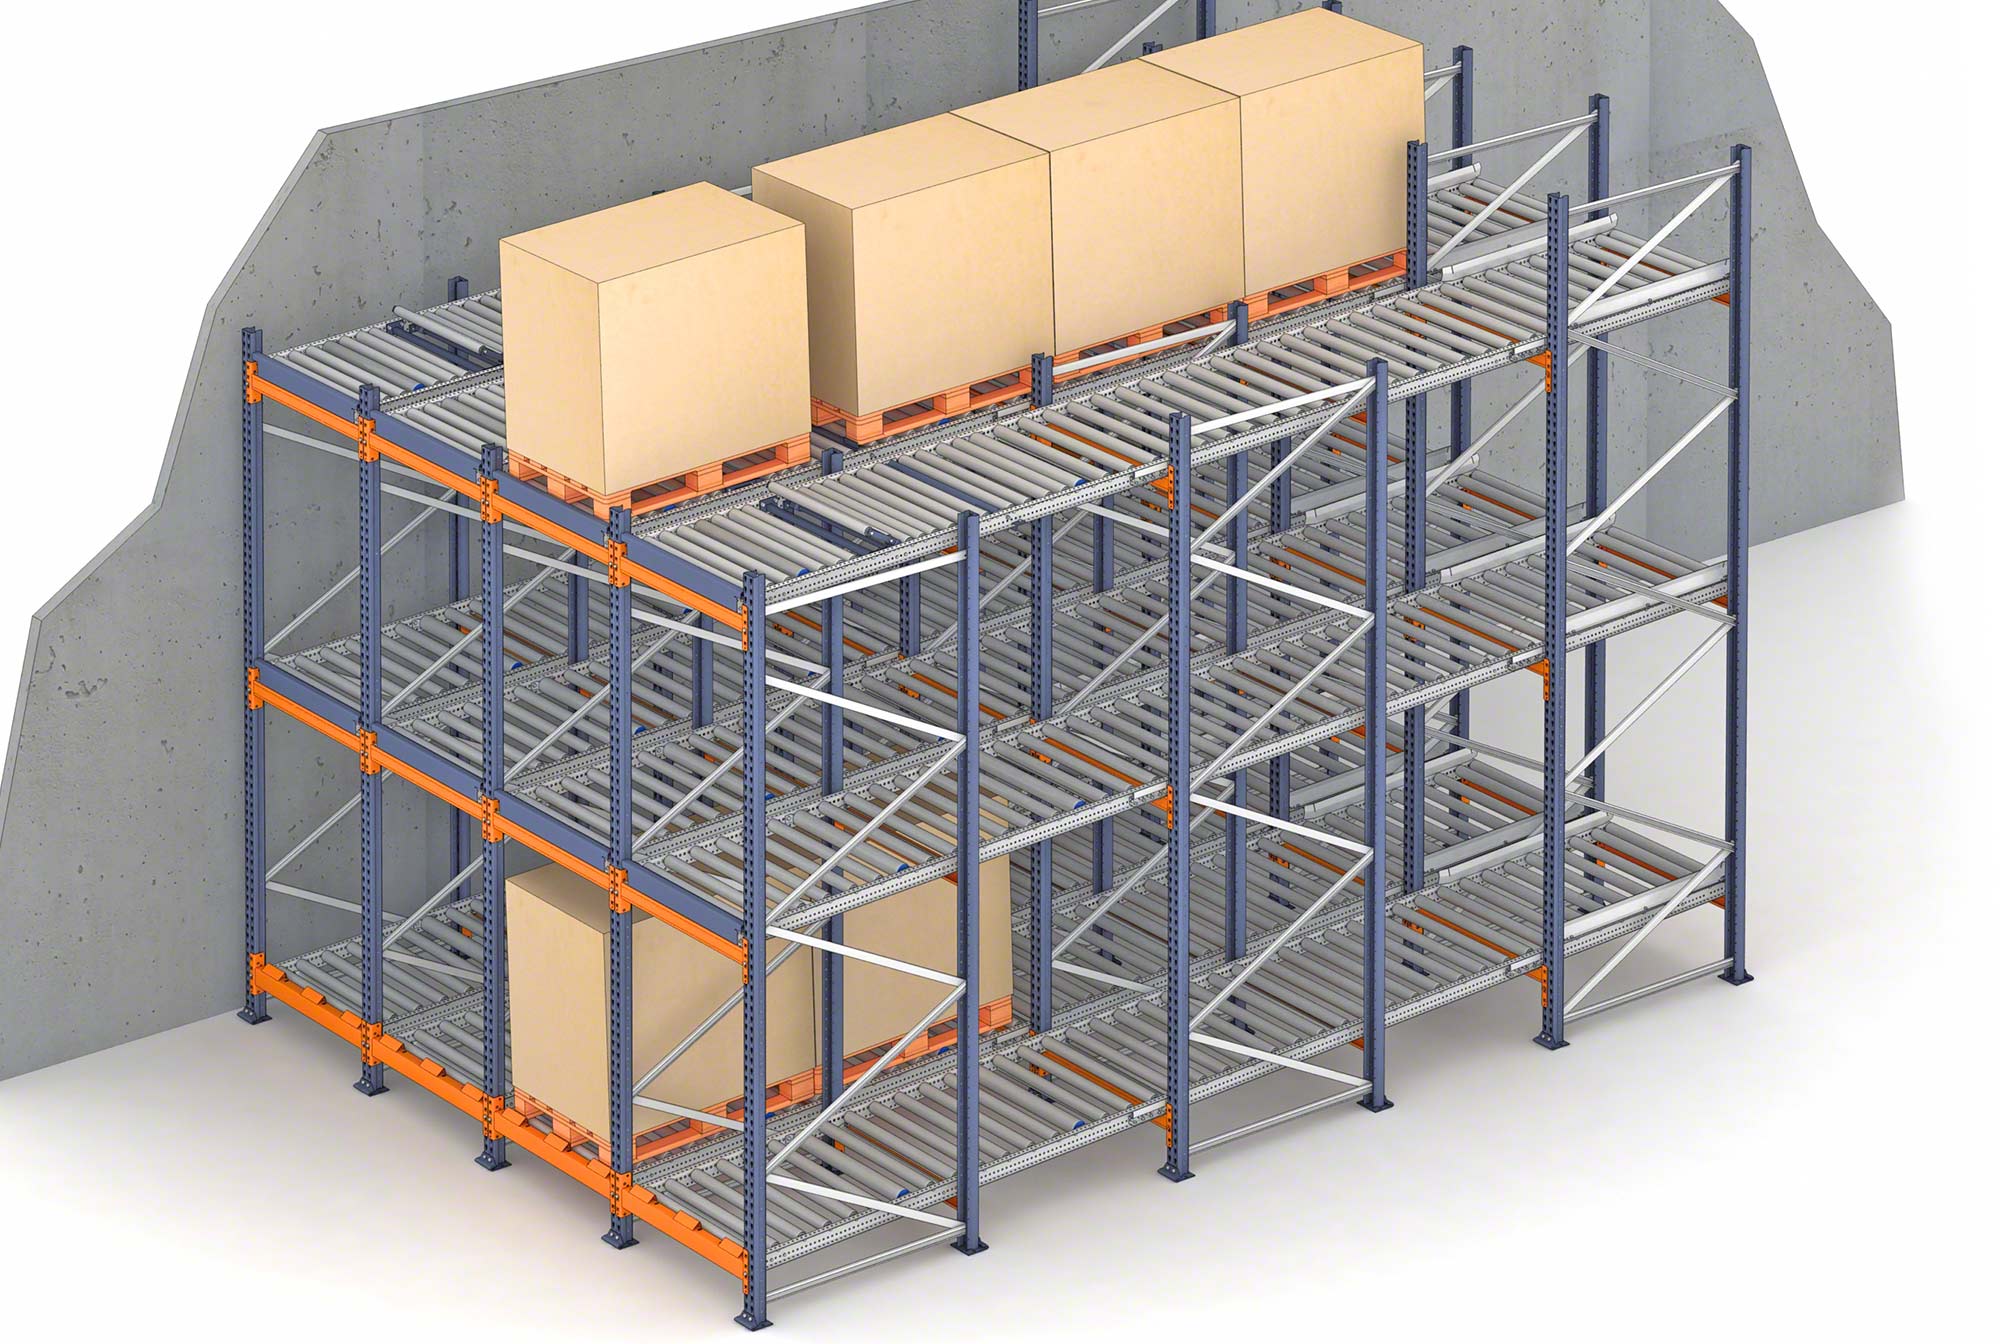 The pallet flow rack is an agile and efficient high-density storage system